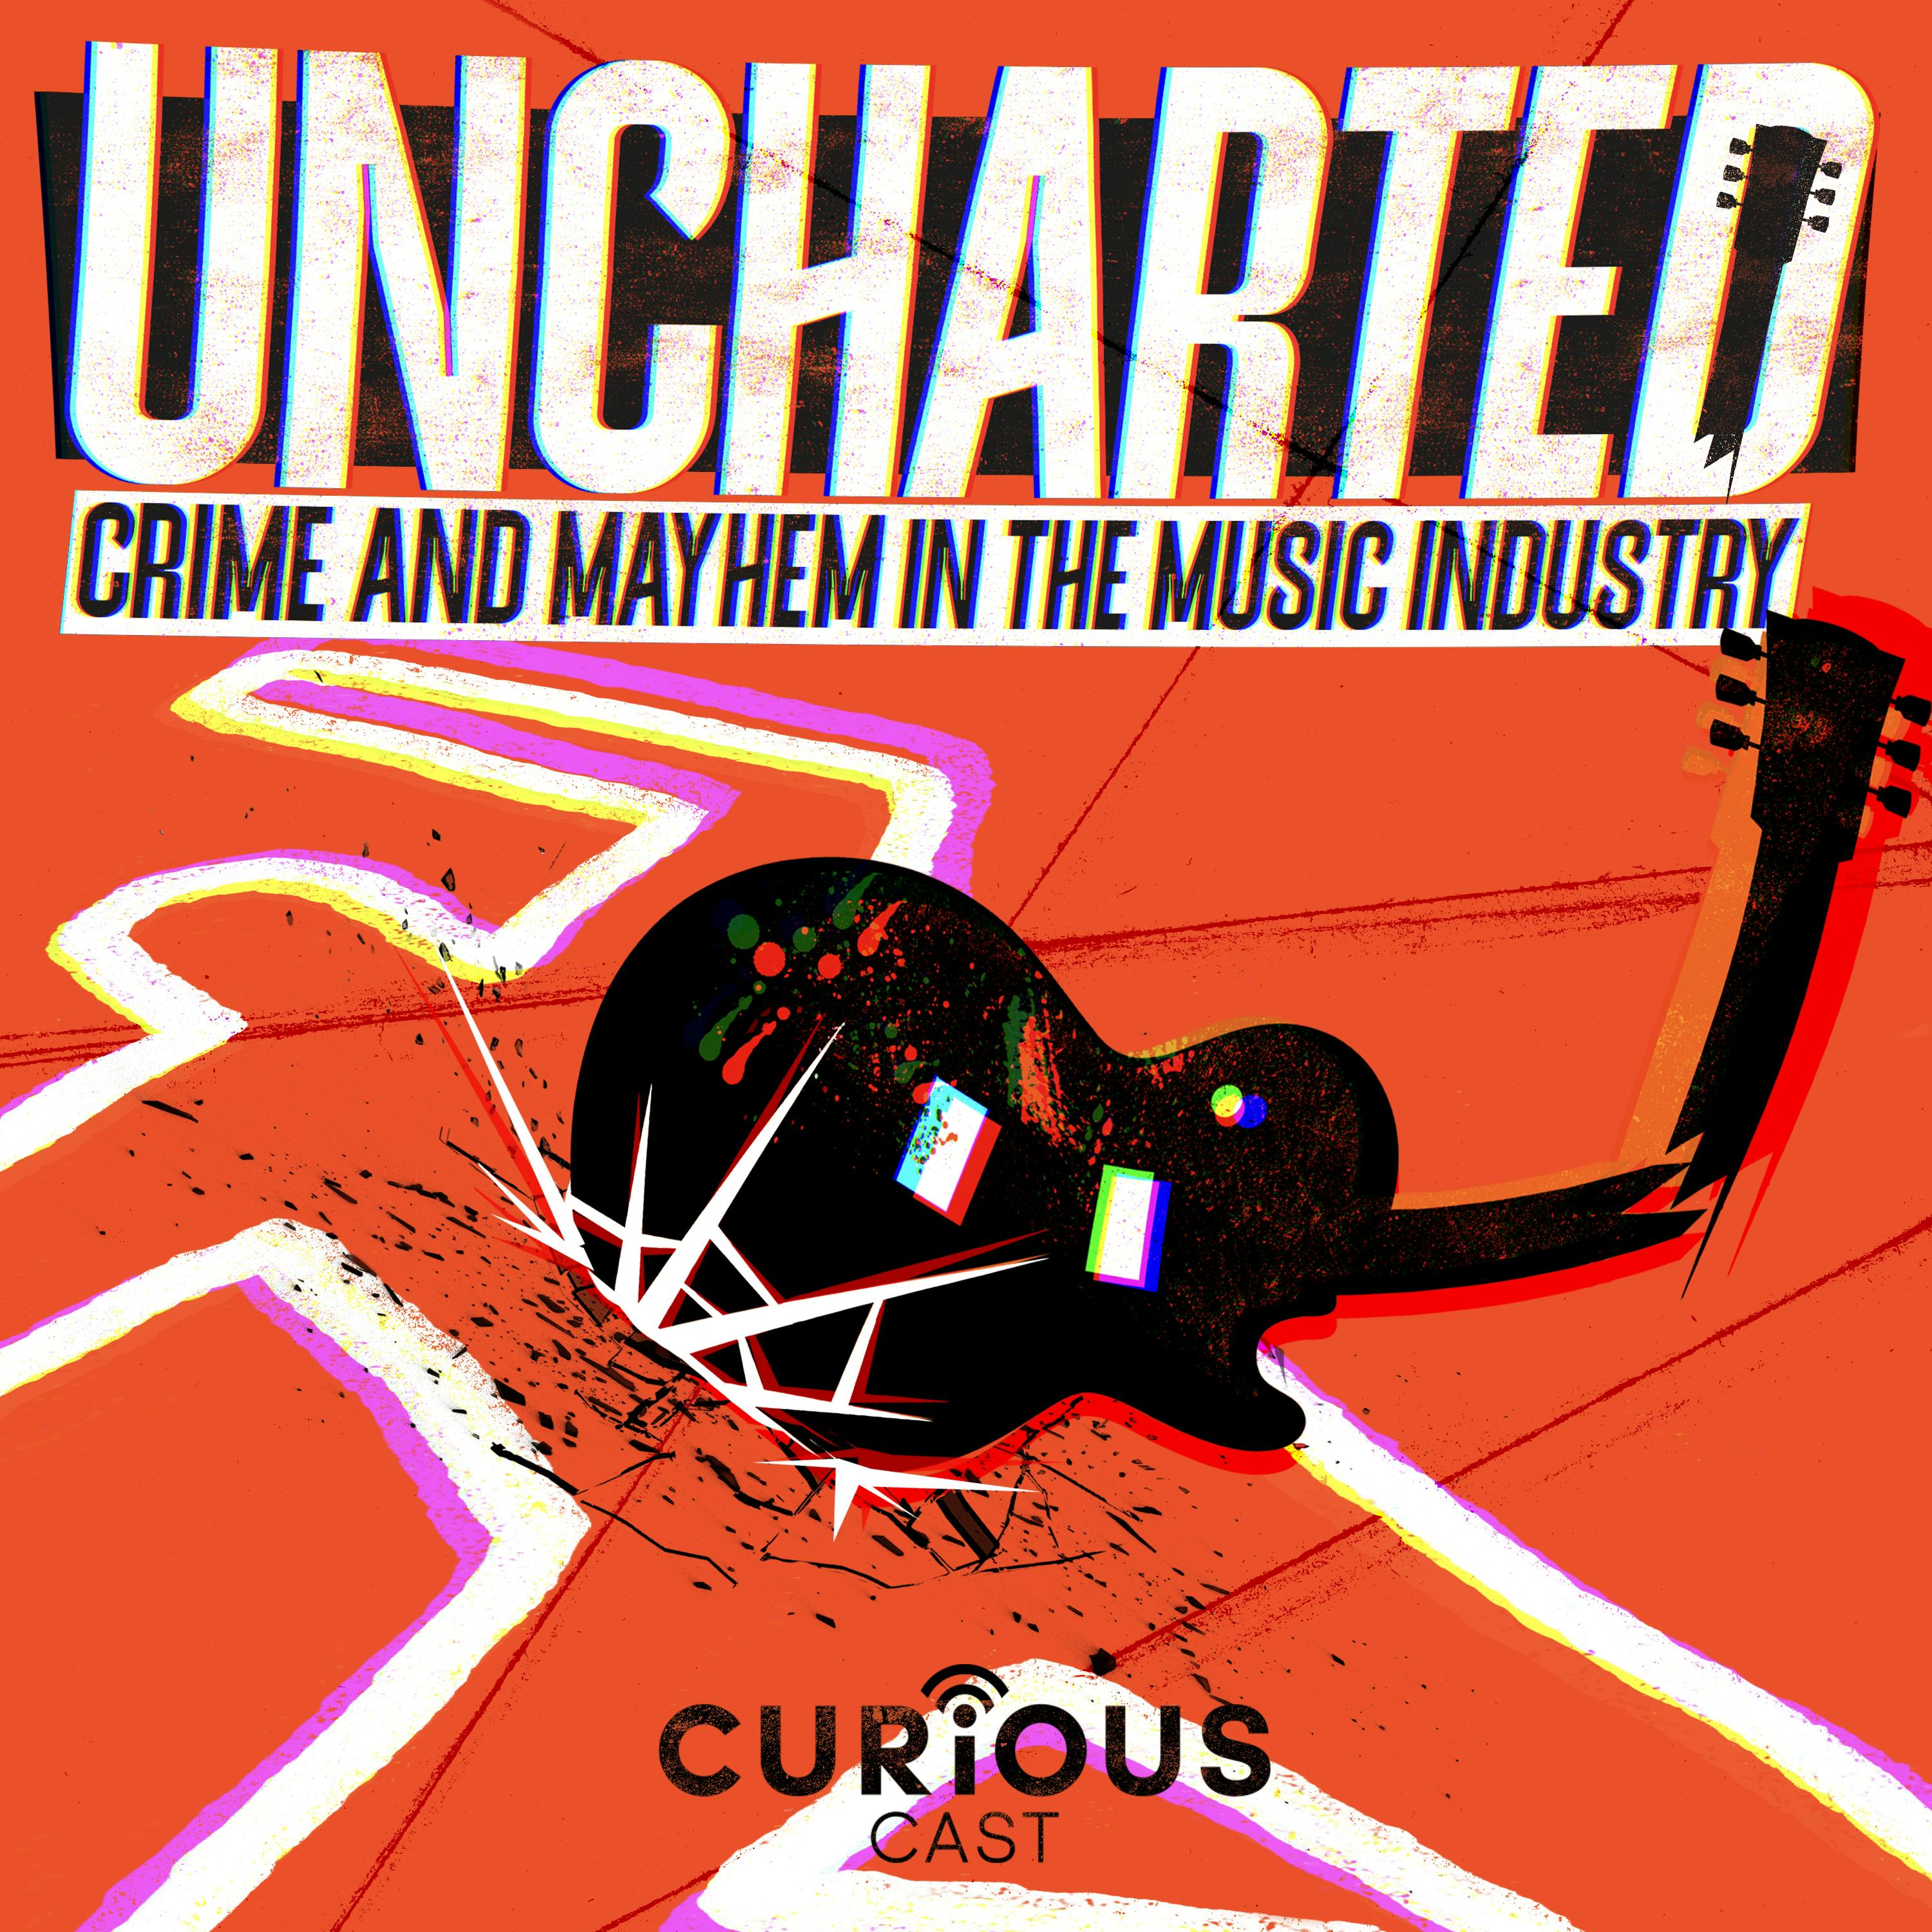 Introducing... Uncharted: Crime and Mayhem in the Music Industry | The Lynyrd Skynyrd Plane Crash | 1